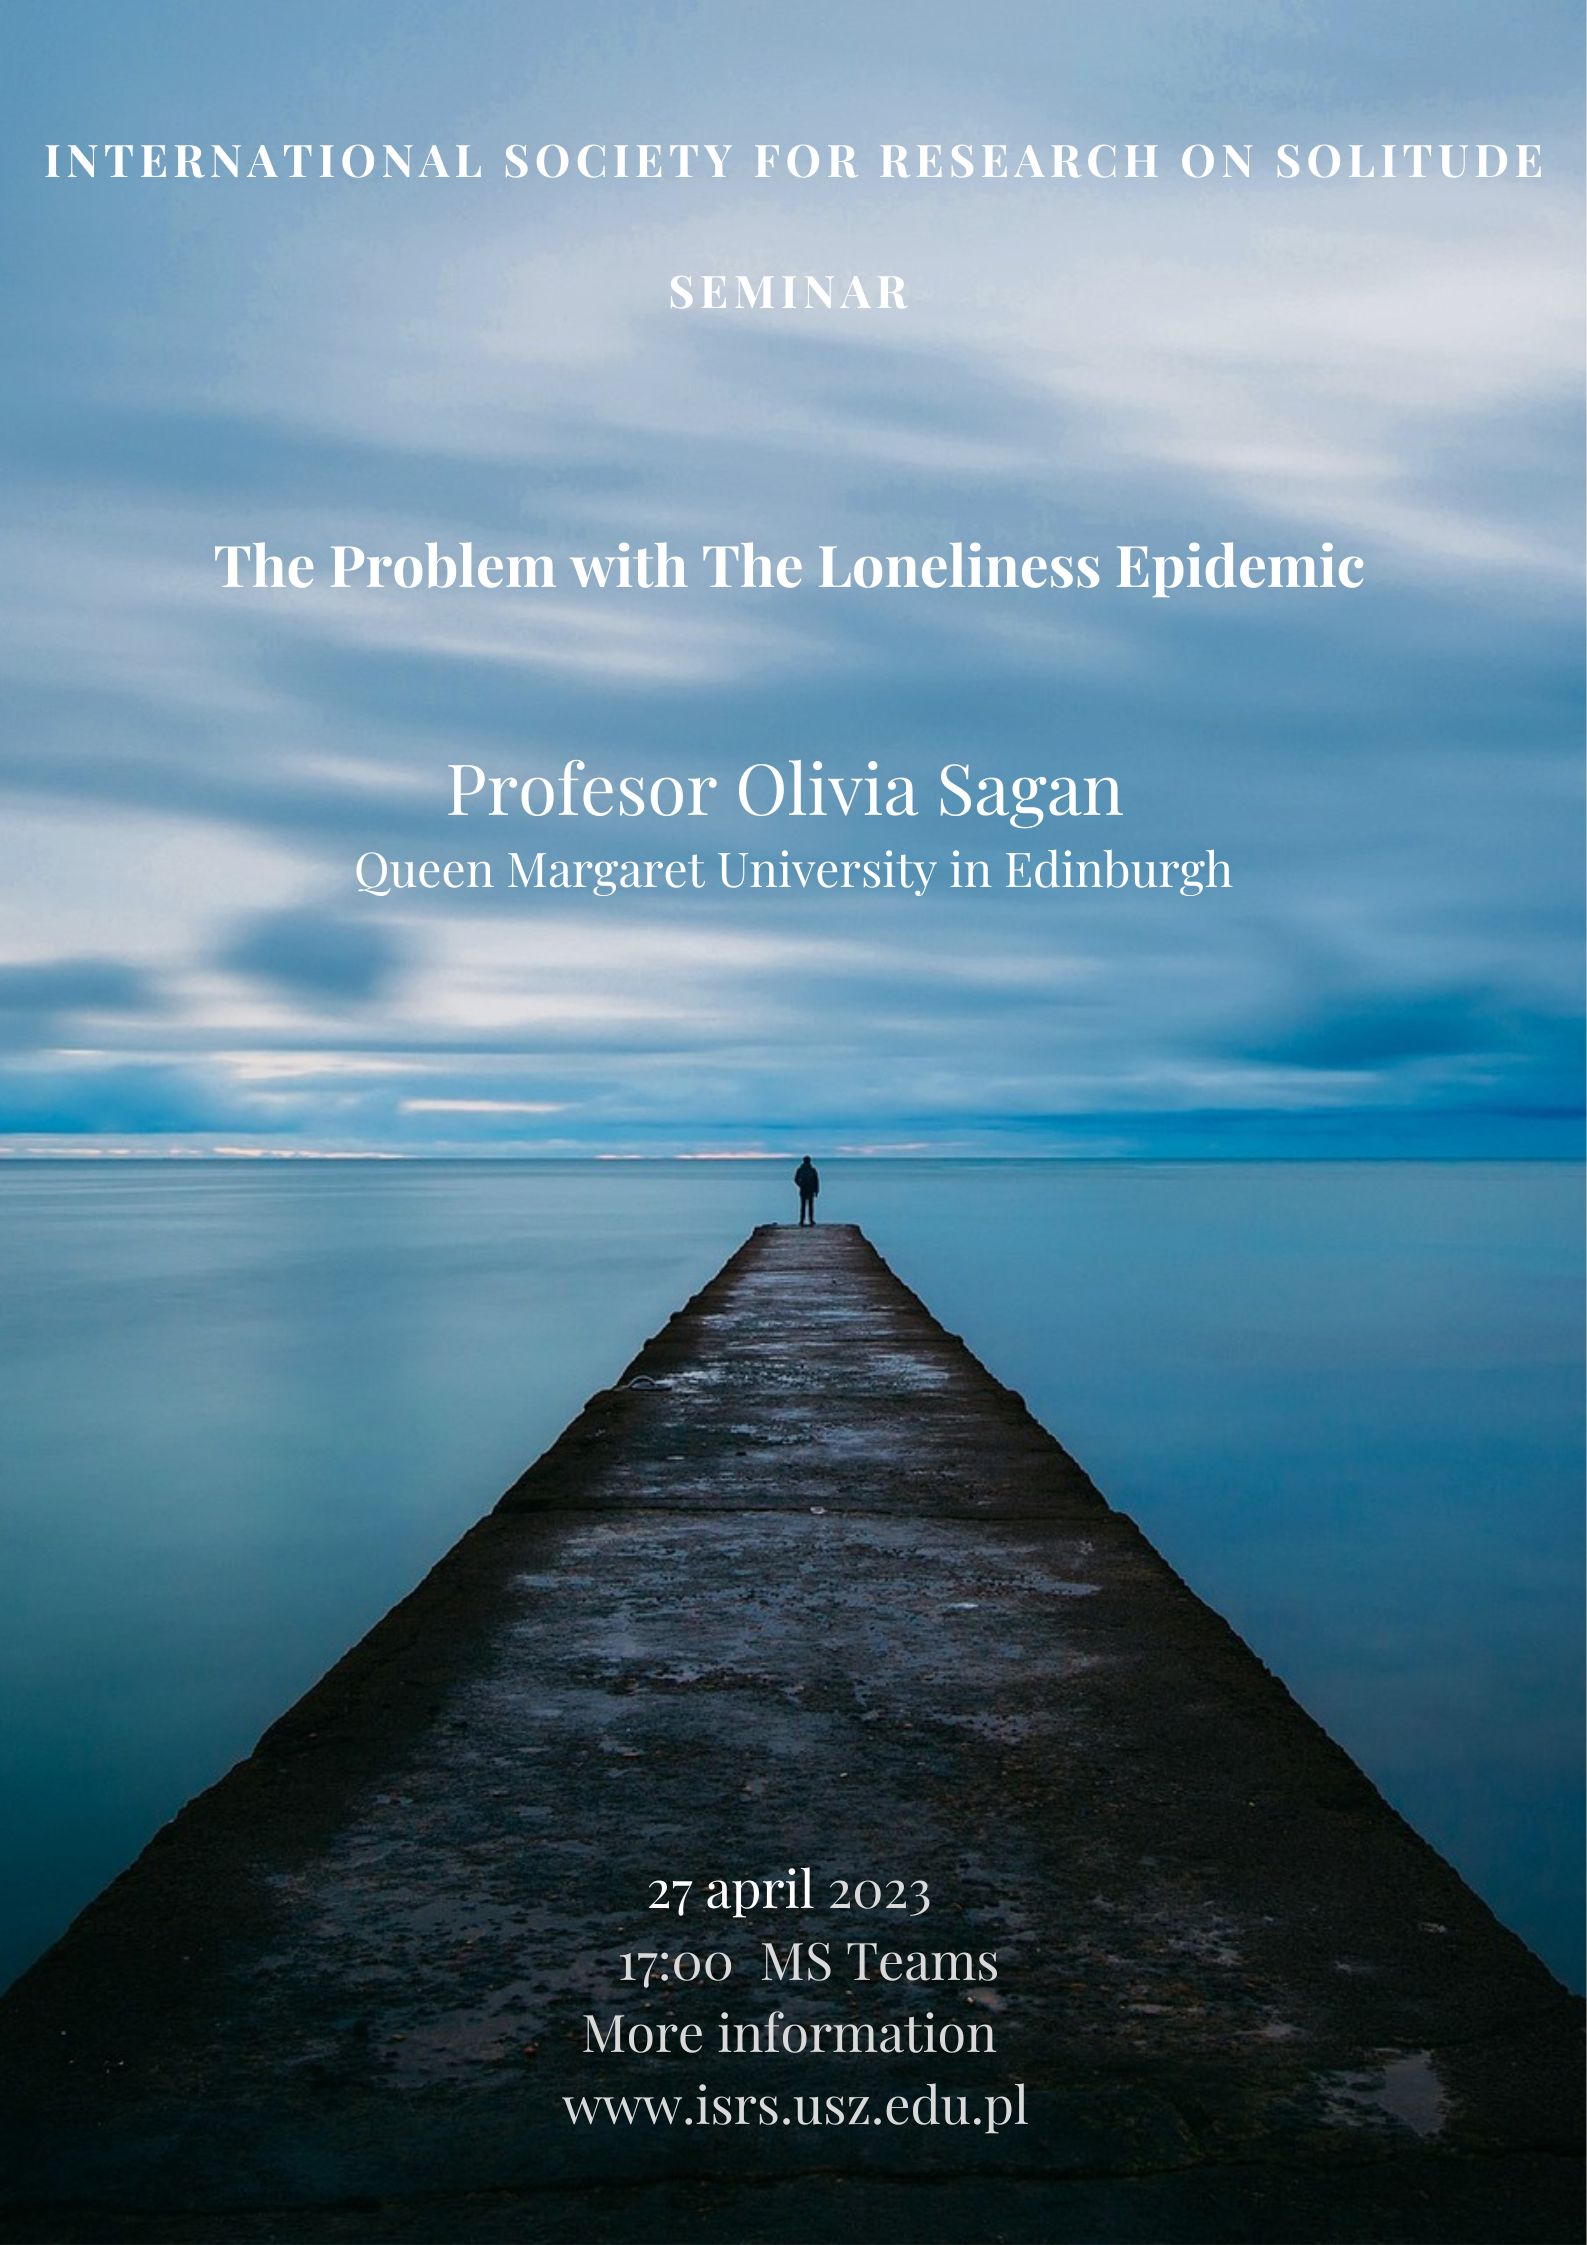 The problem with the loneliness epidemic. Seminar with Professor Olivia Sagan